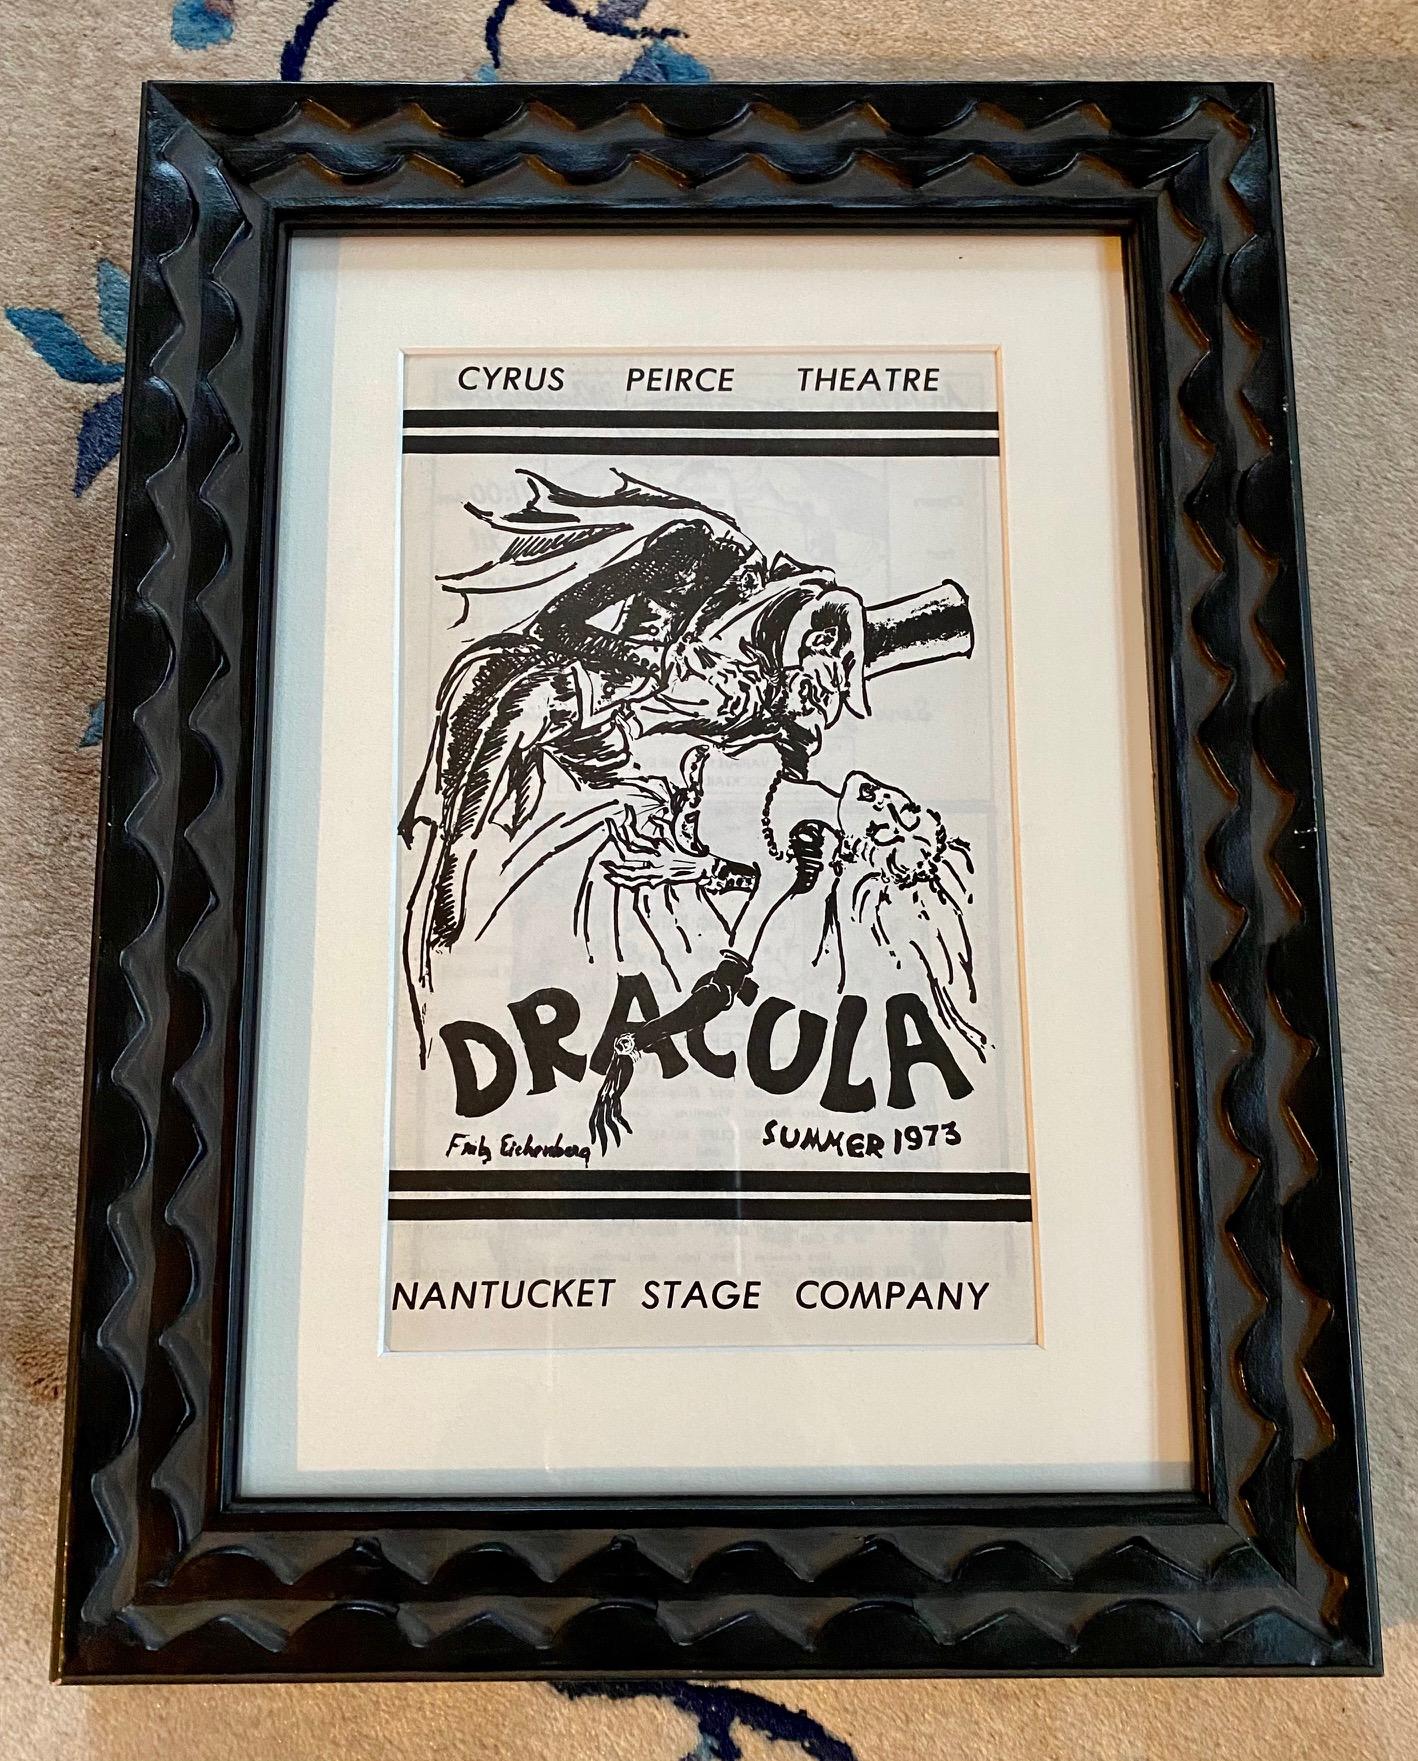 Original Program for Nantucket Stage Production Dracula, Signed by Edward Gorey For Sale 1